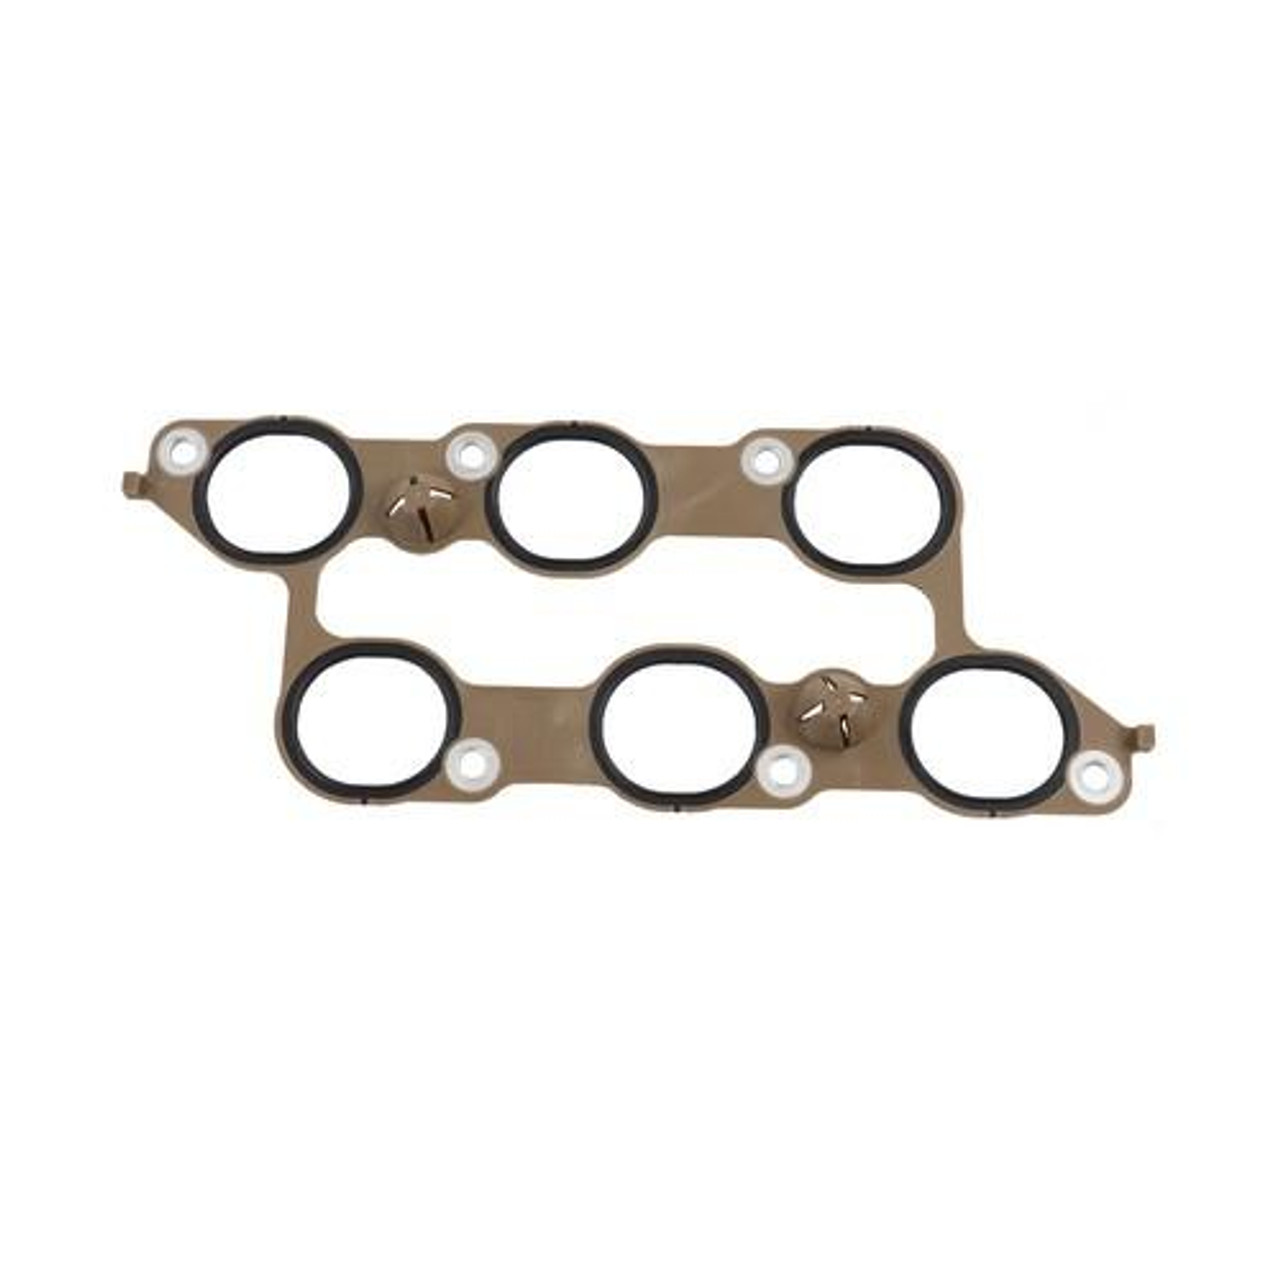 2015 Chevrolet Impala Limited 3.6L Fuel Injection Plenum Gasket MG3230AEP53